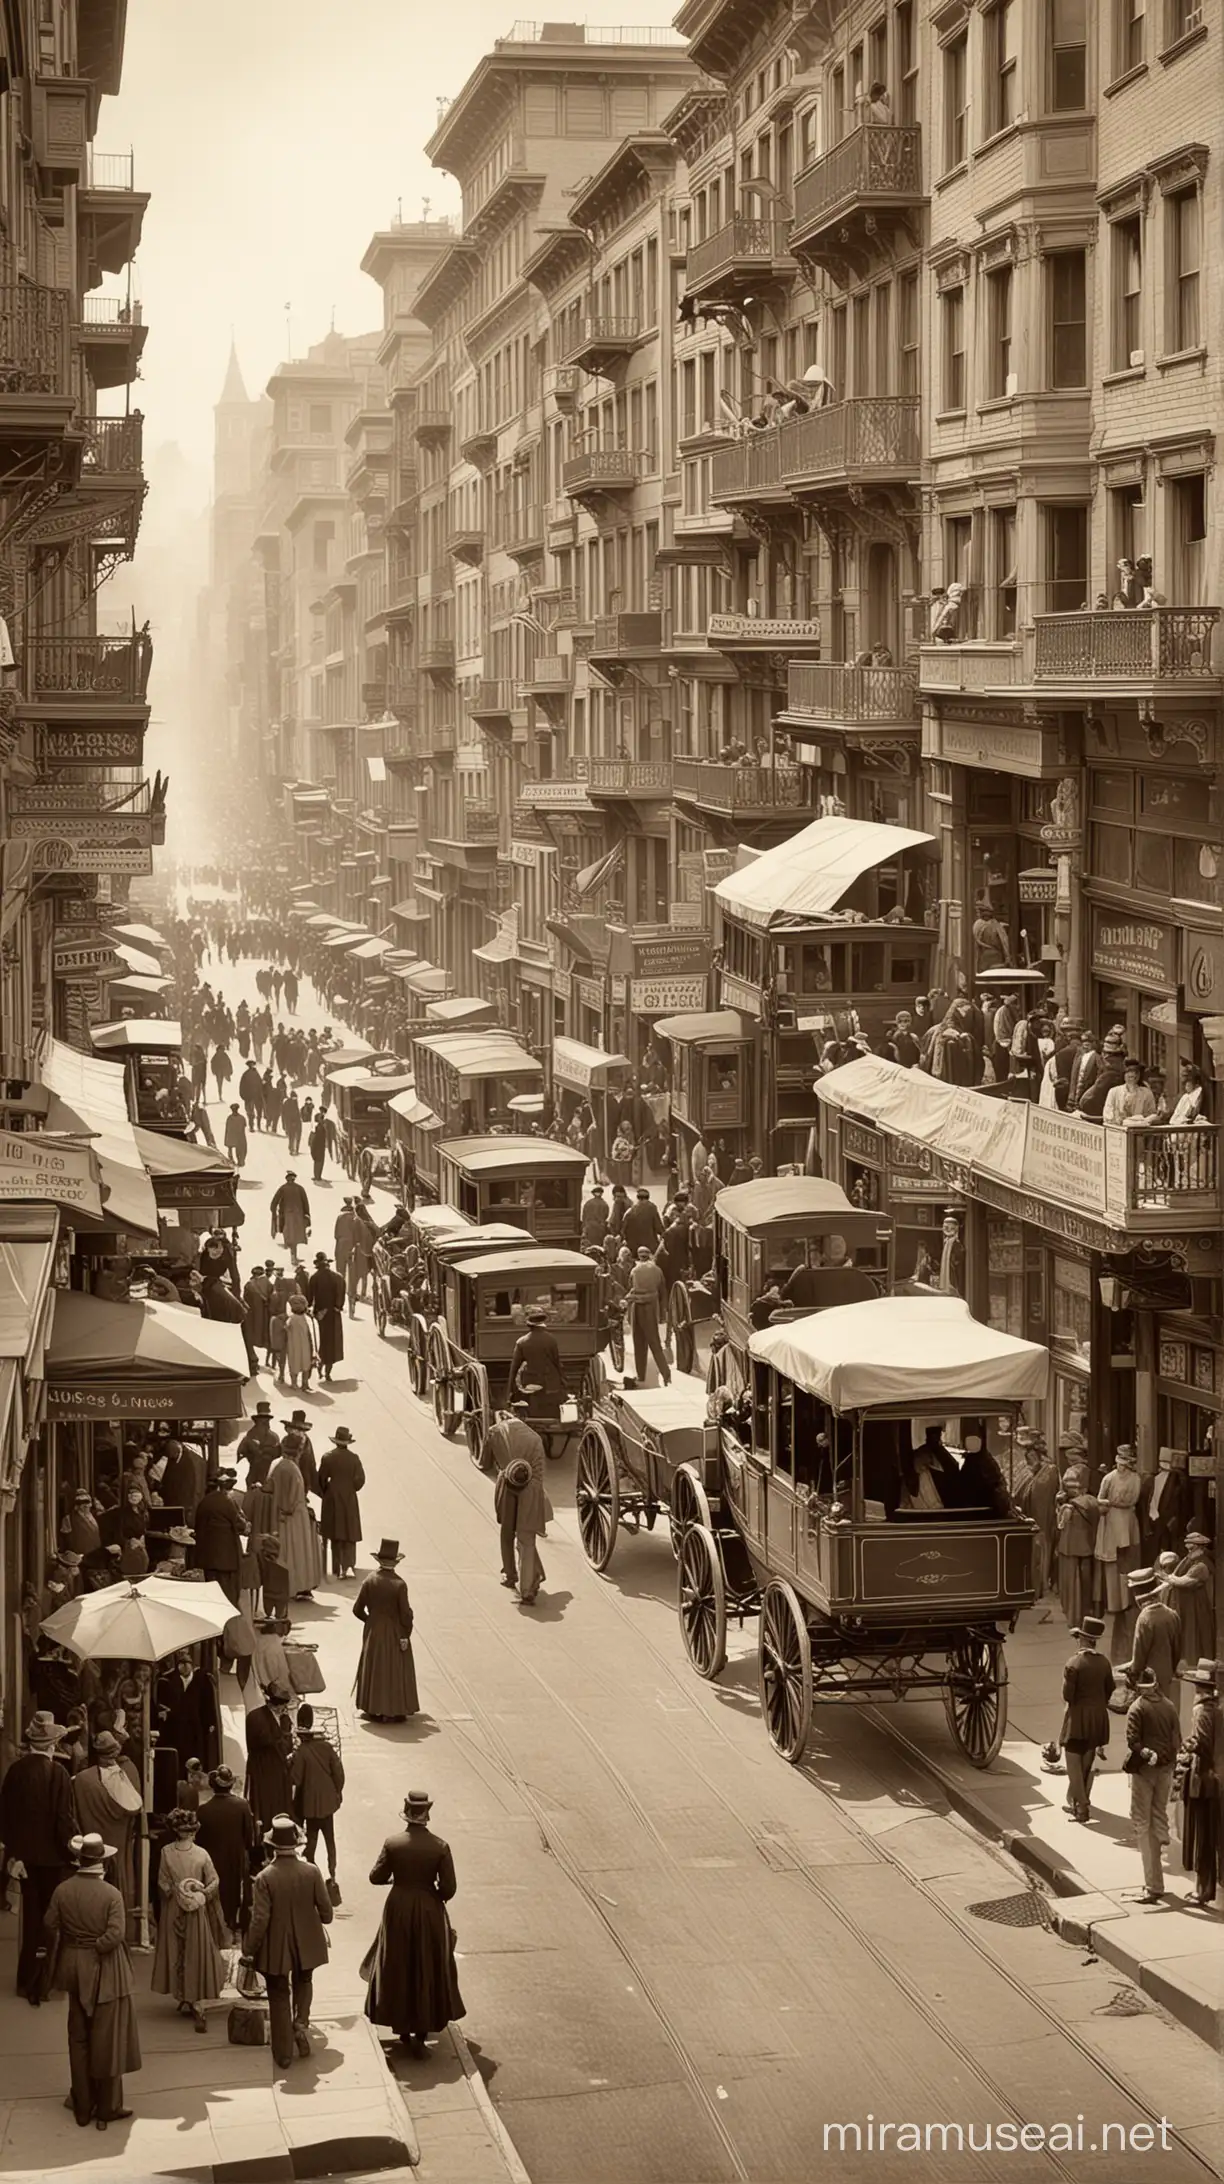 A bustling street scene in 19th century San Francisco, filled with people of diverse backgrounds and activities.